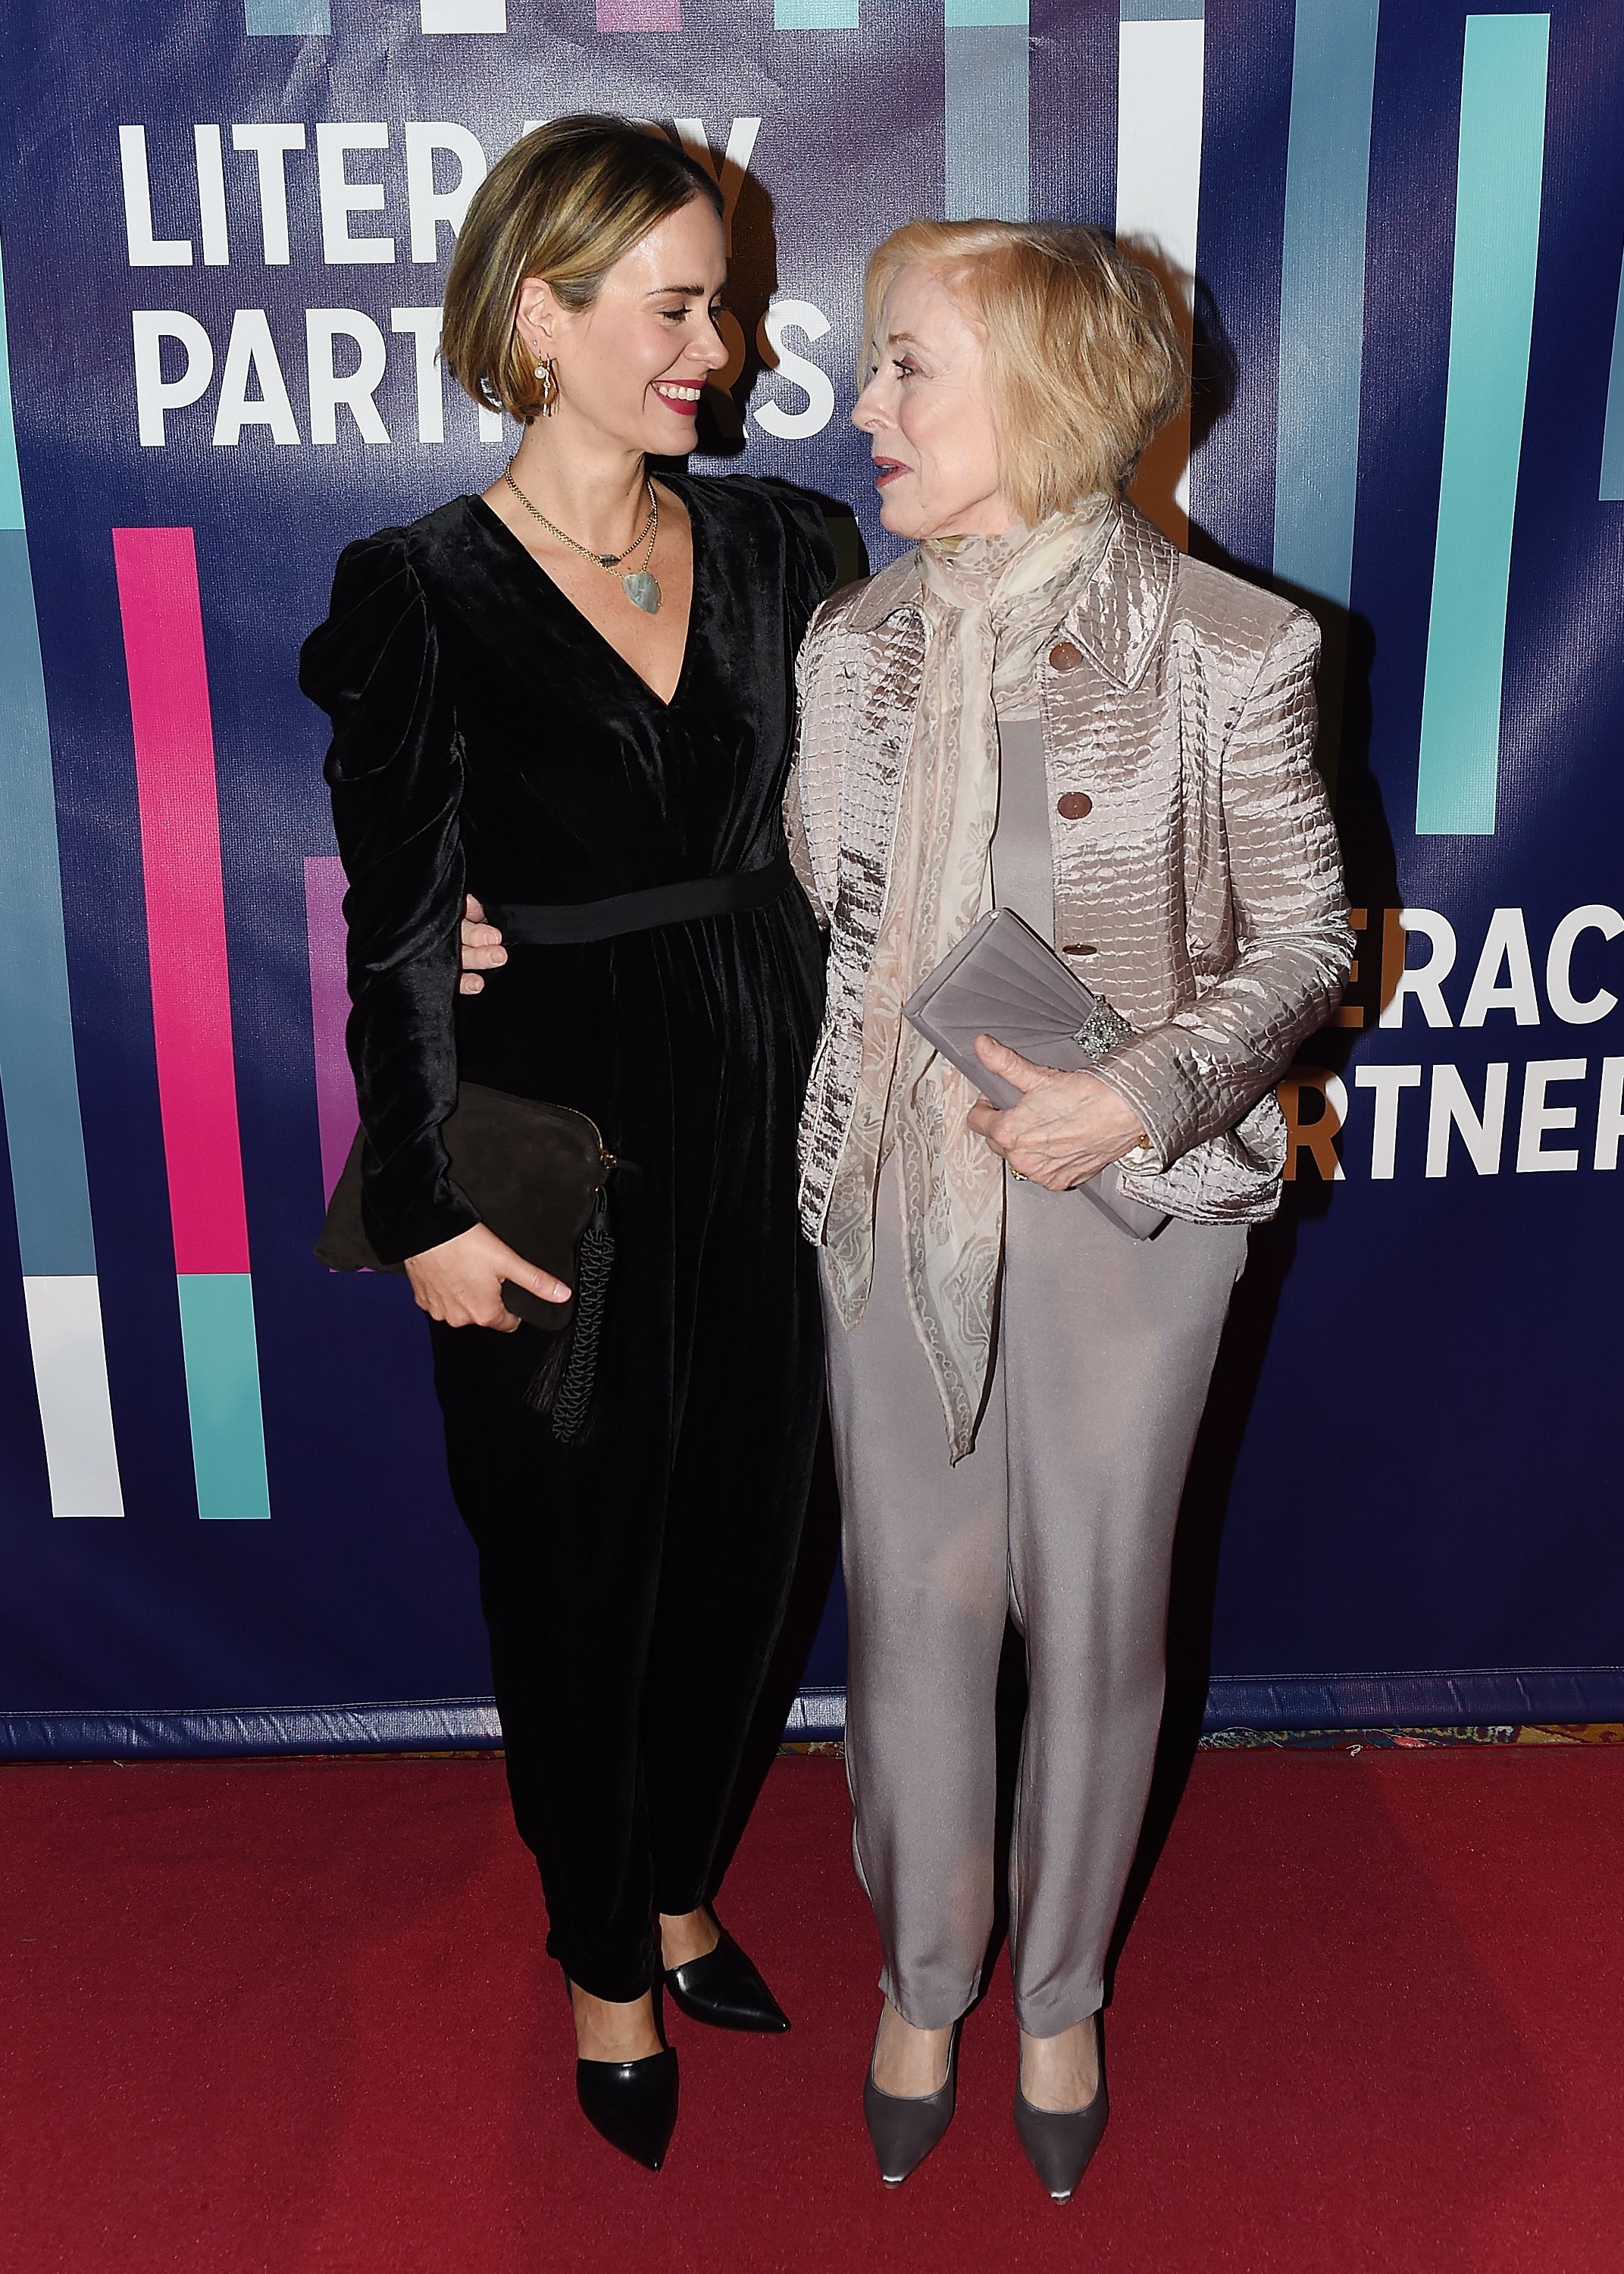 Sarah Paulson and Holland Taylor attend the 2018 Literacy Partners Gala. | Source: Getty Images